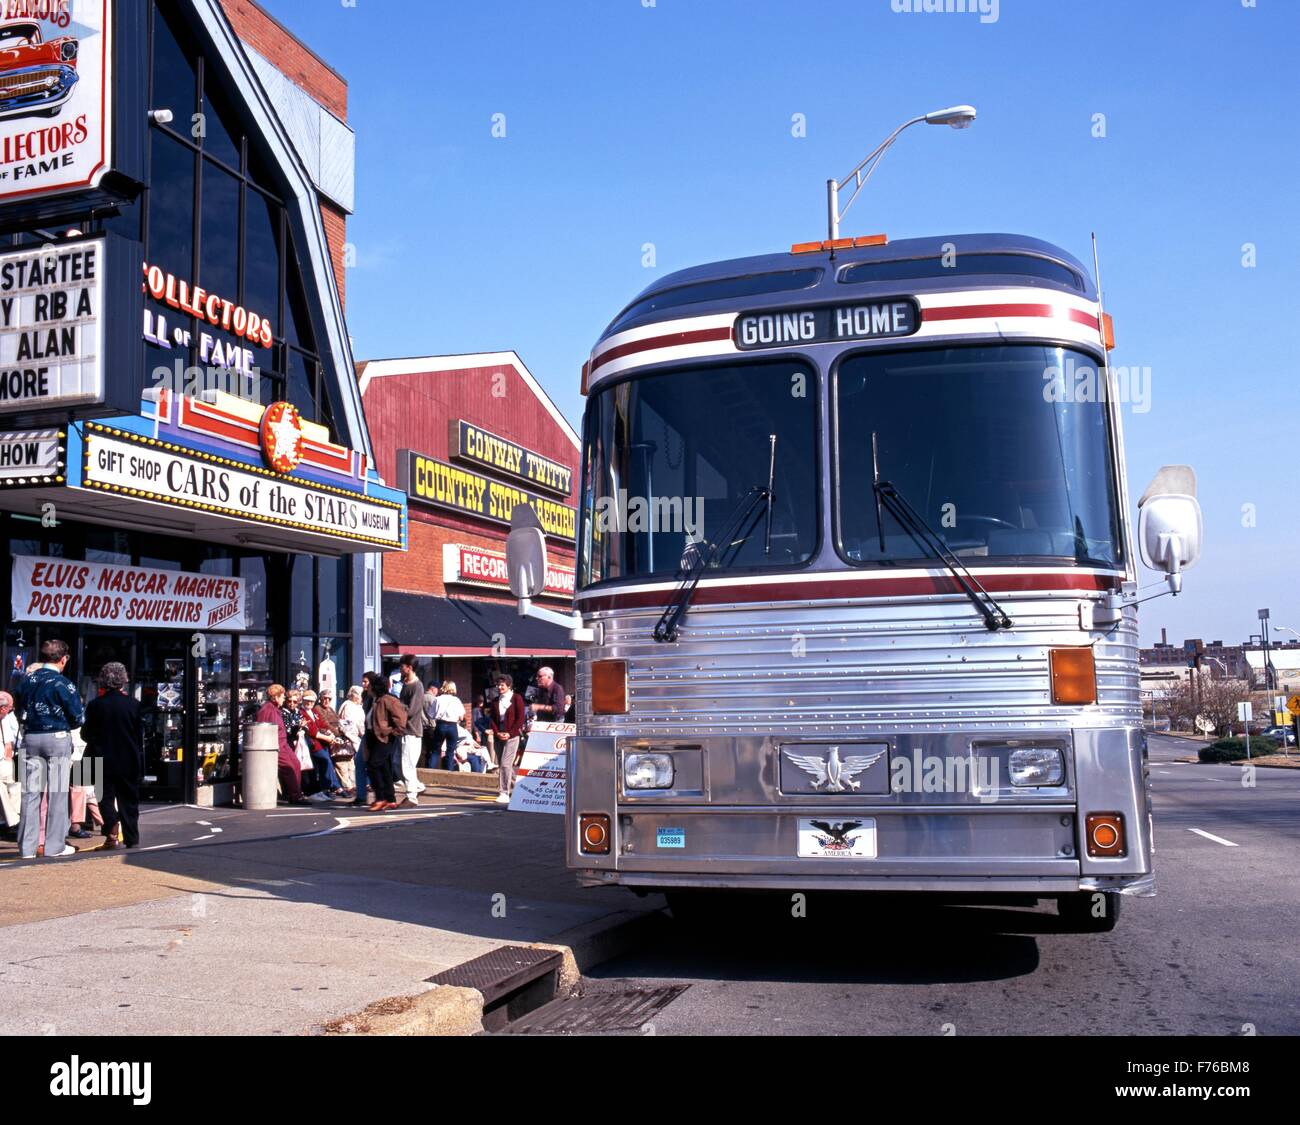 Tour bus parked outside shops and businesses along Music Row, Nashville, Tennessee, United States of America. Stock Photo